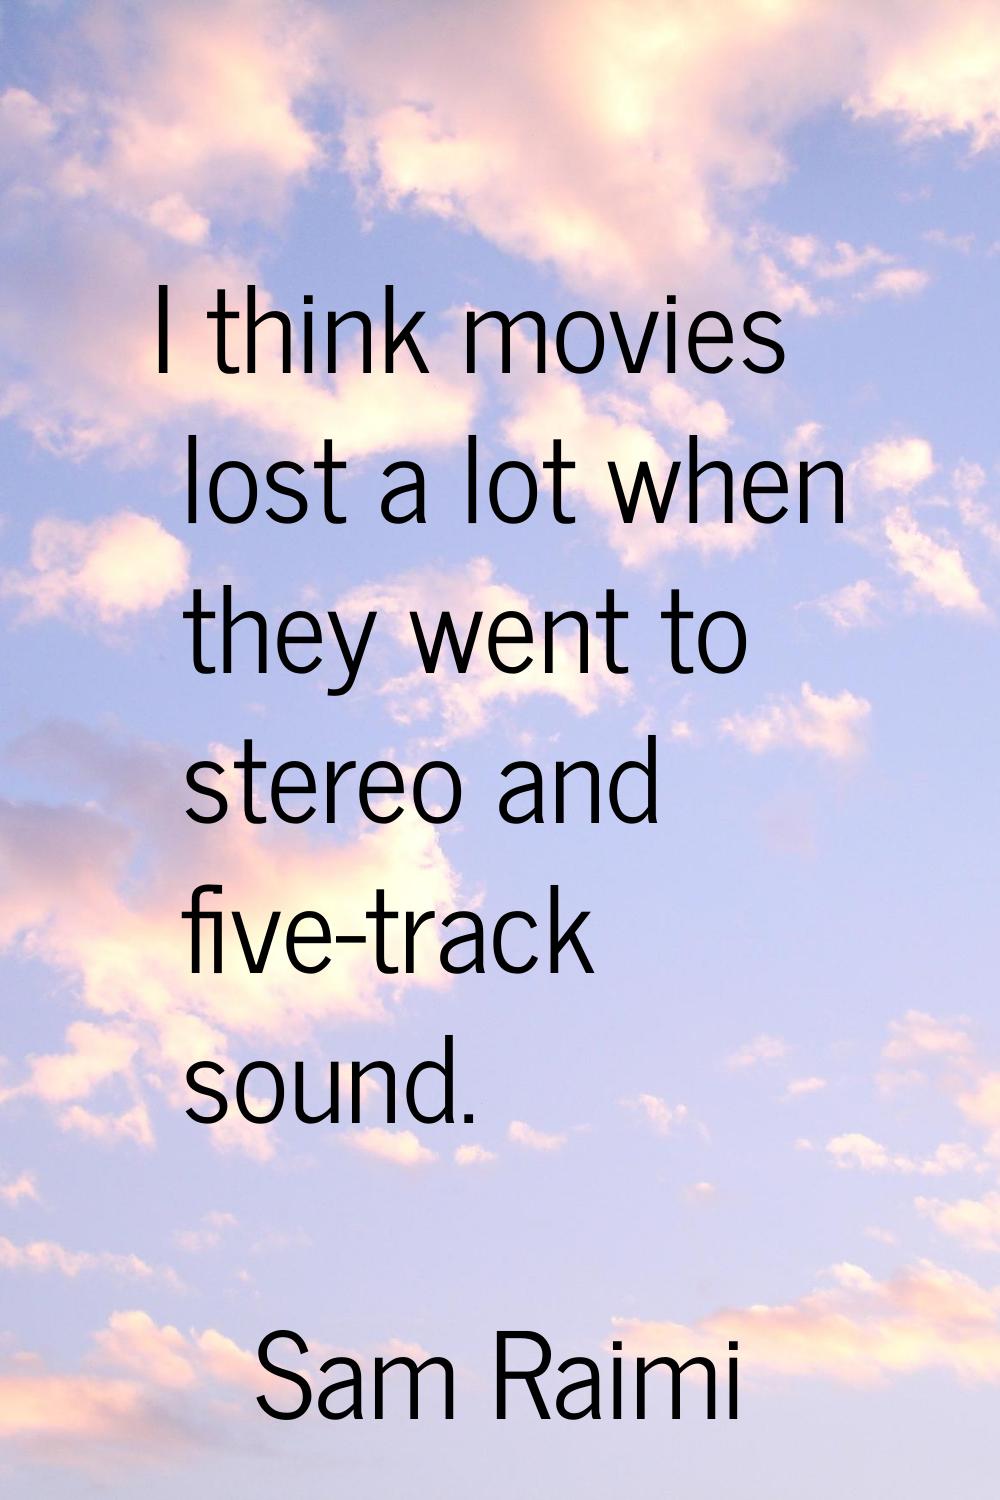 I think movies lost a lot when they went to stereo and five-track sound.